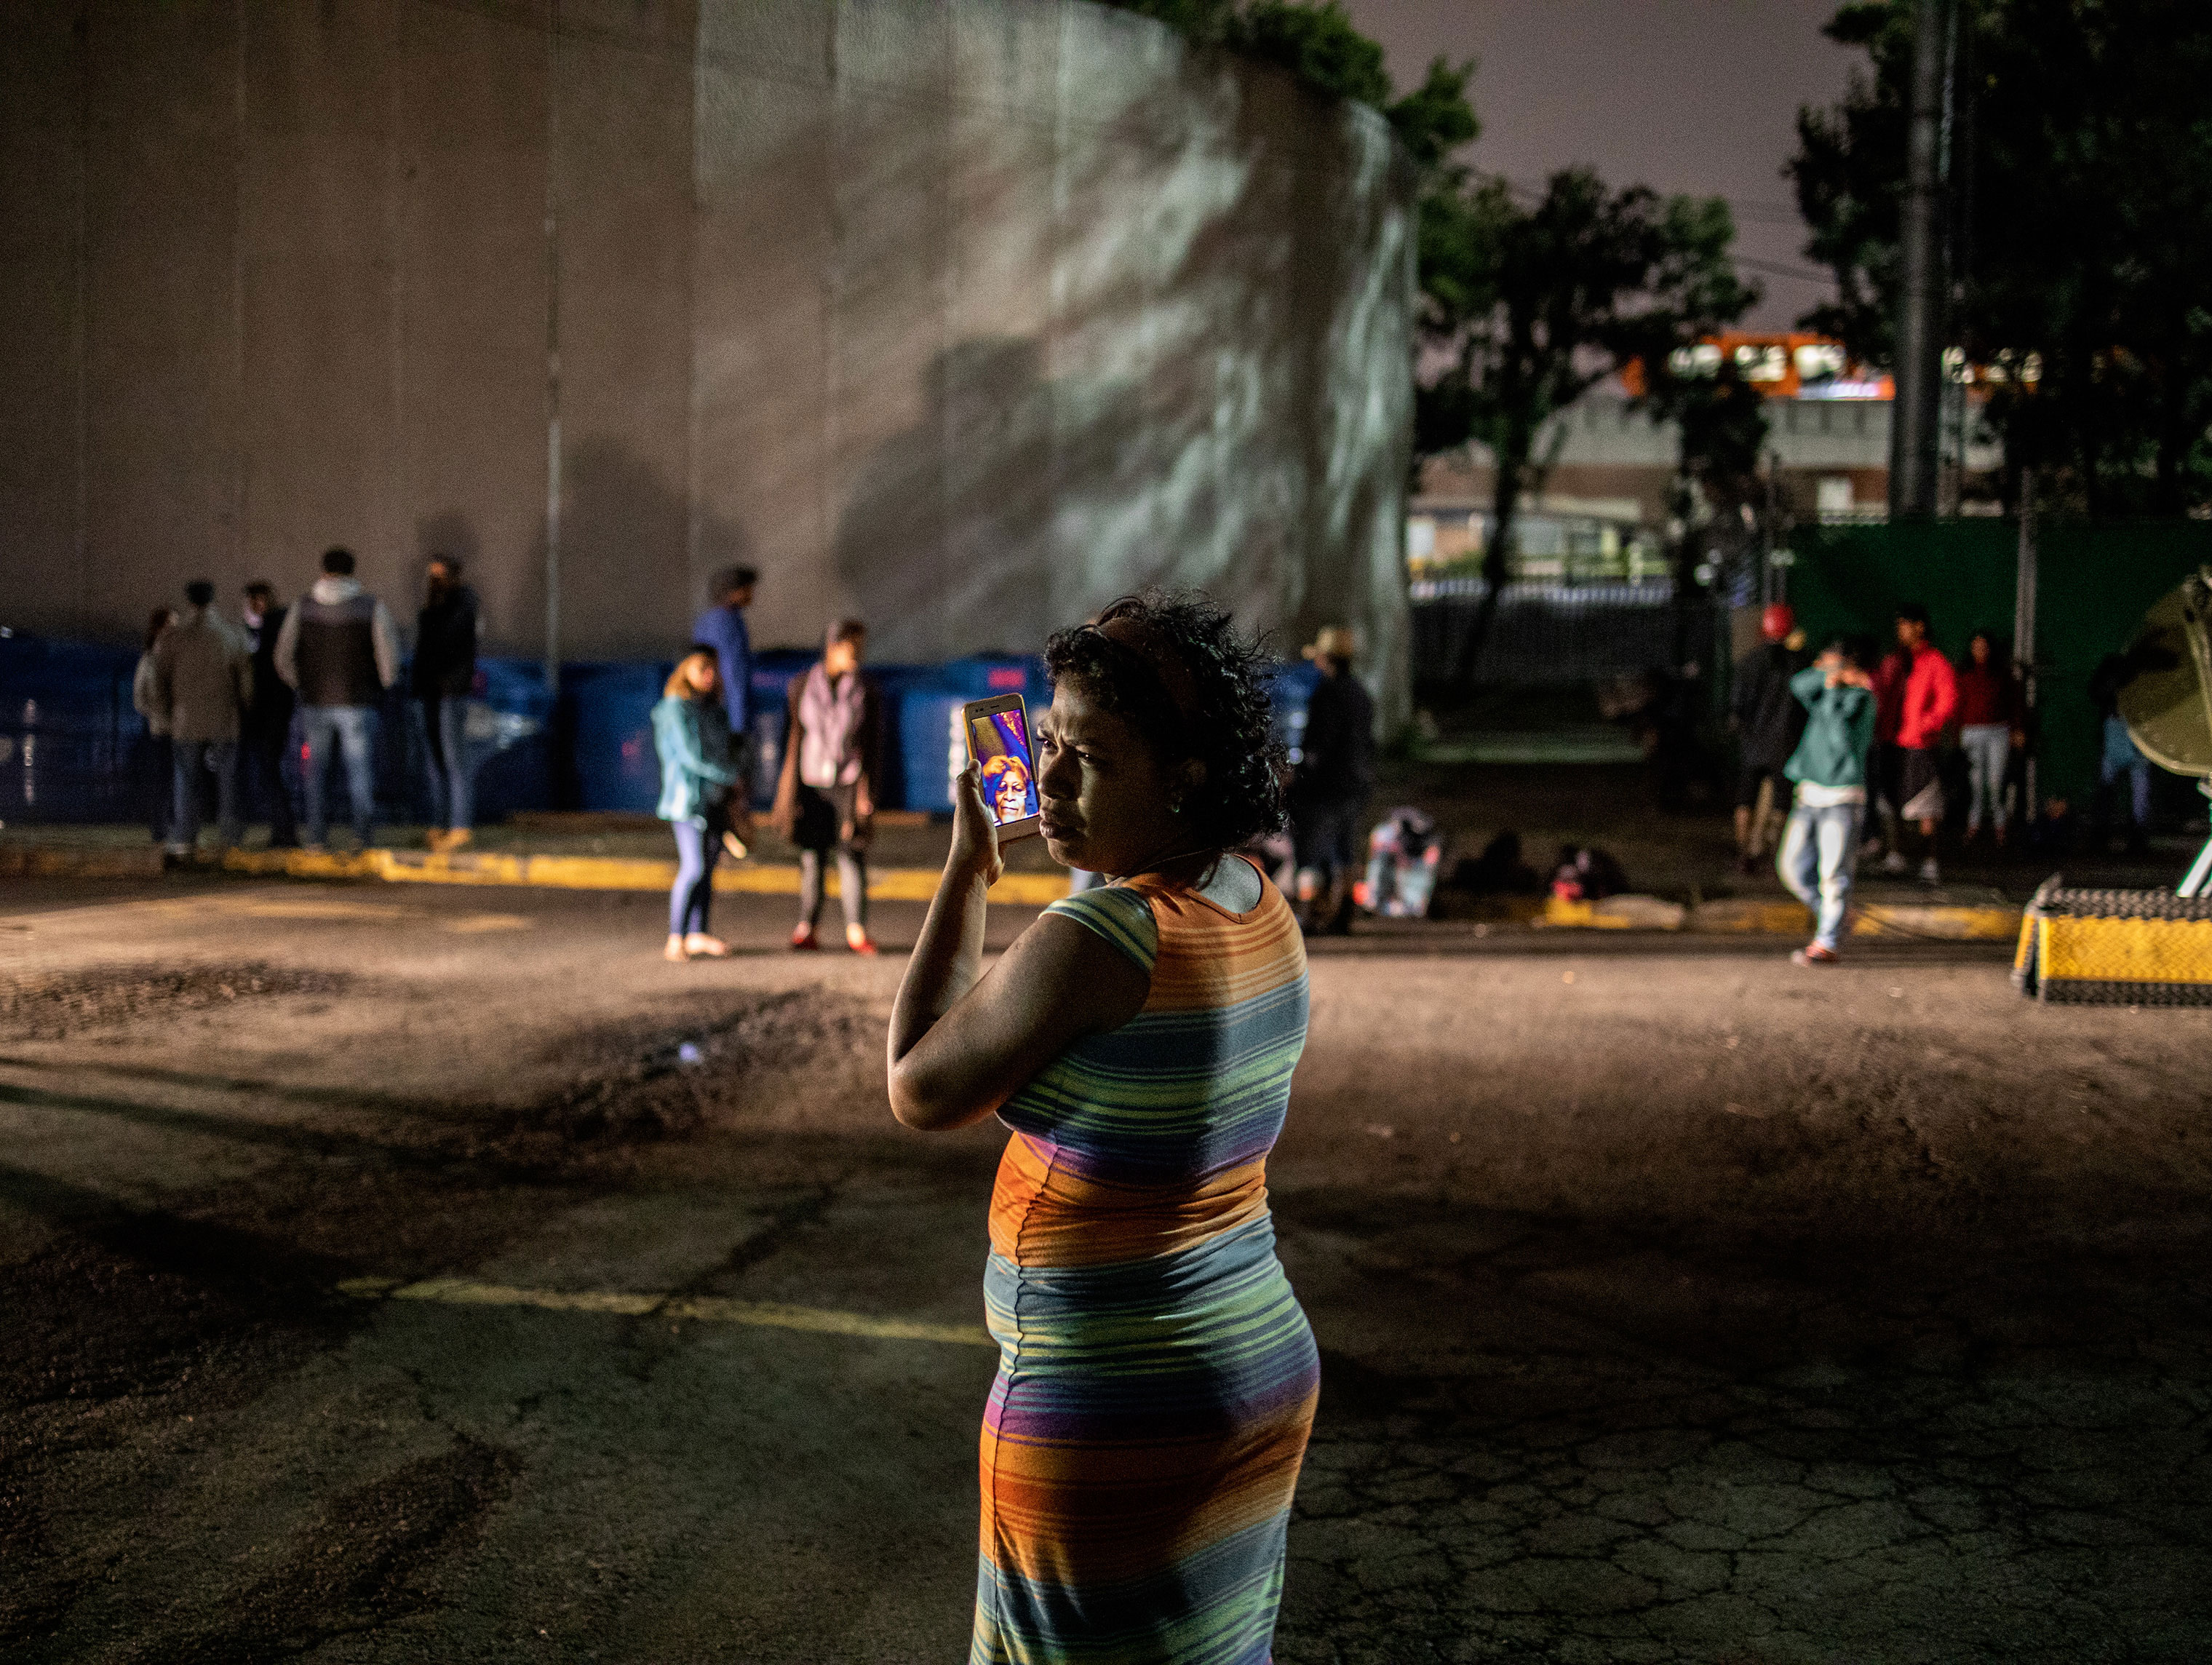 Outside the Jesus Martinez stadium, in Mexico City on Nov. 4, 2018. Martha, 25, from Colón Honduras is a single mother of three young children. "There is no work in my country, there's nothing." She says that she left her country to help her children have a better future. (Jerome Sessini—Magnum Photos for TIME)